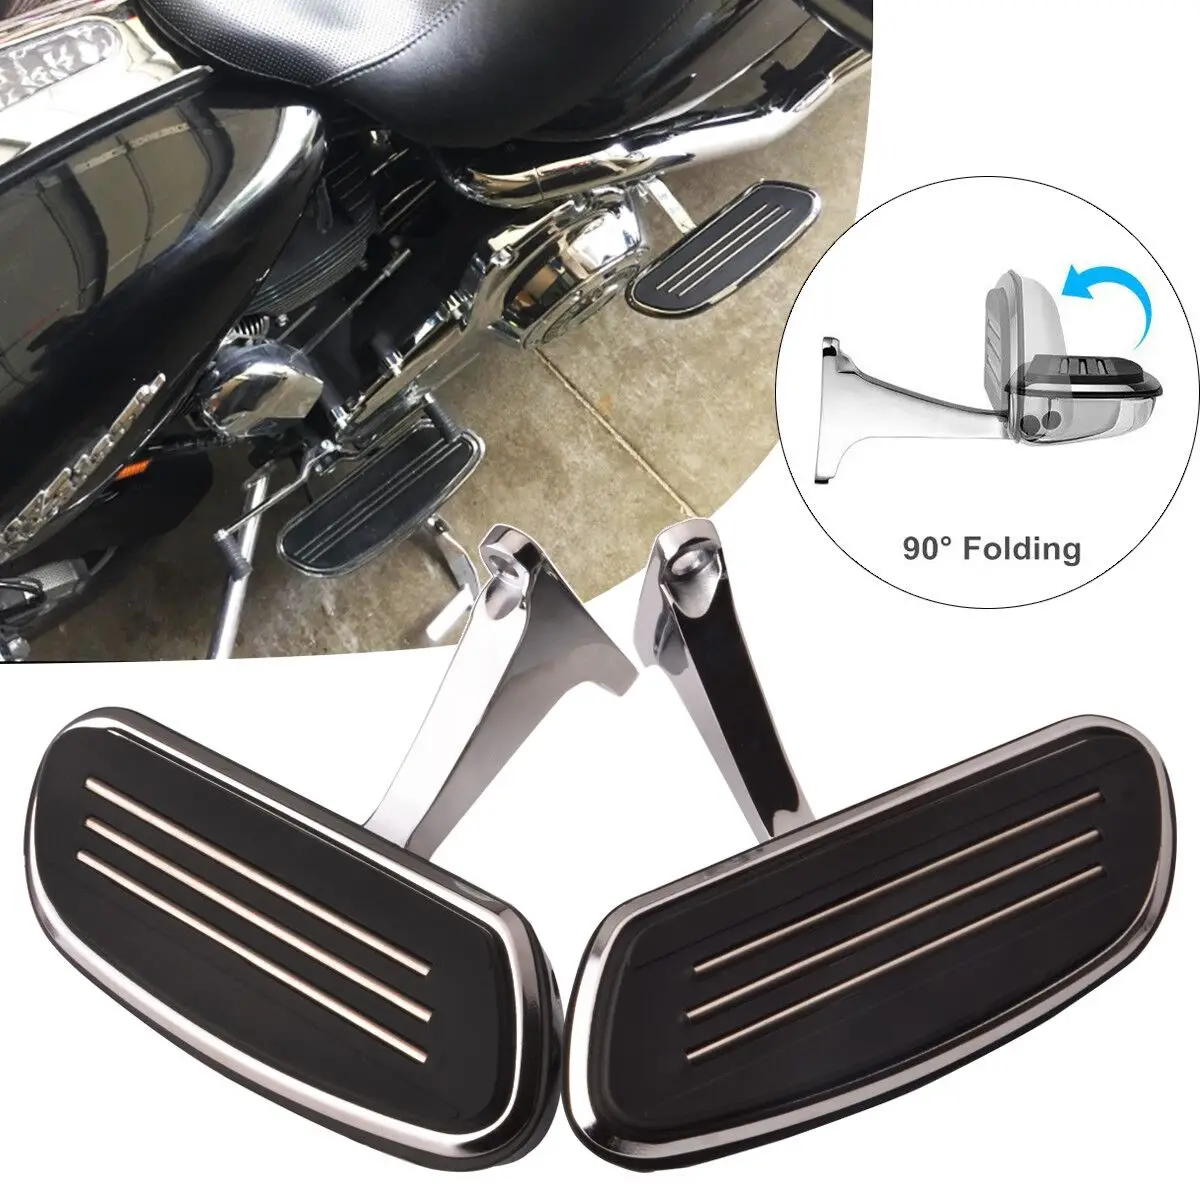 

Rear Passenger Flooboard Running Board Front Rider Footboard For Harley Touring Road King Electra Street Glide CVO 1993-2019